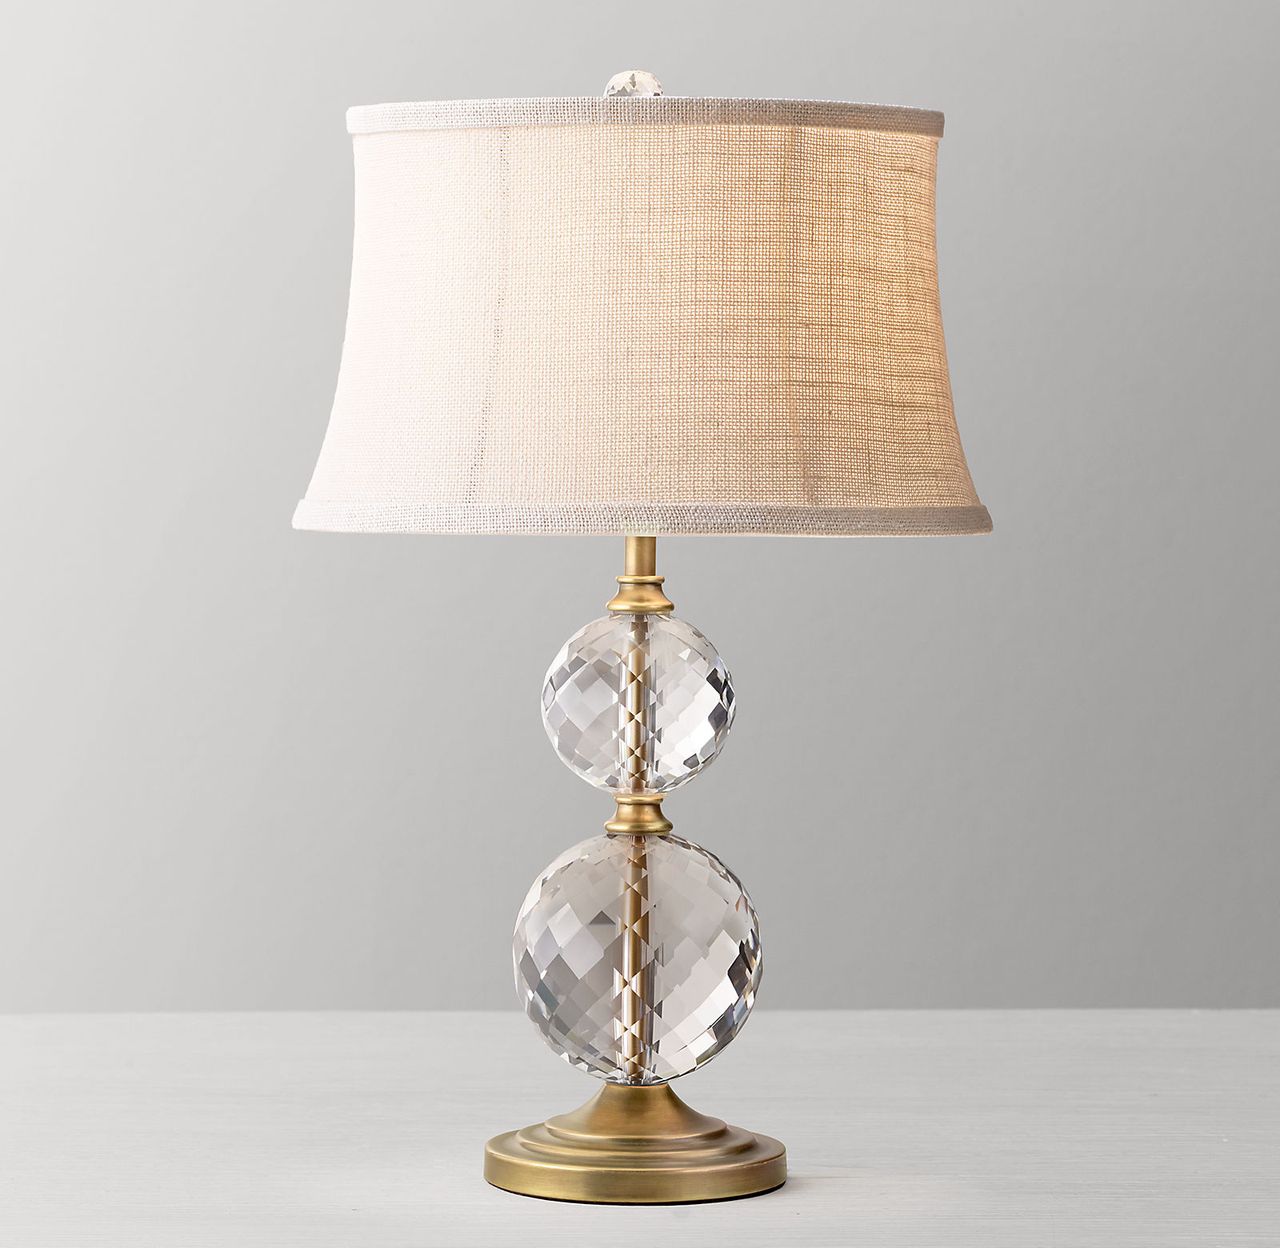 Stacked Crystal Ball Table Lamp Base - Antiqued Brass